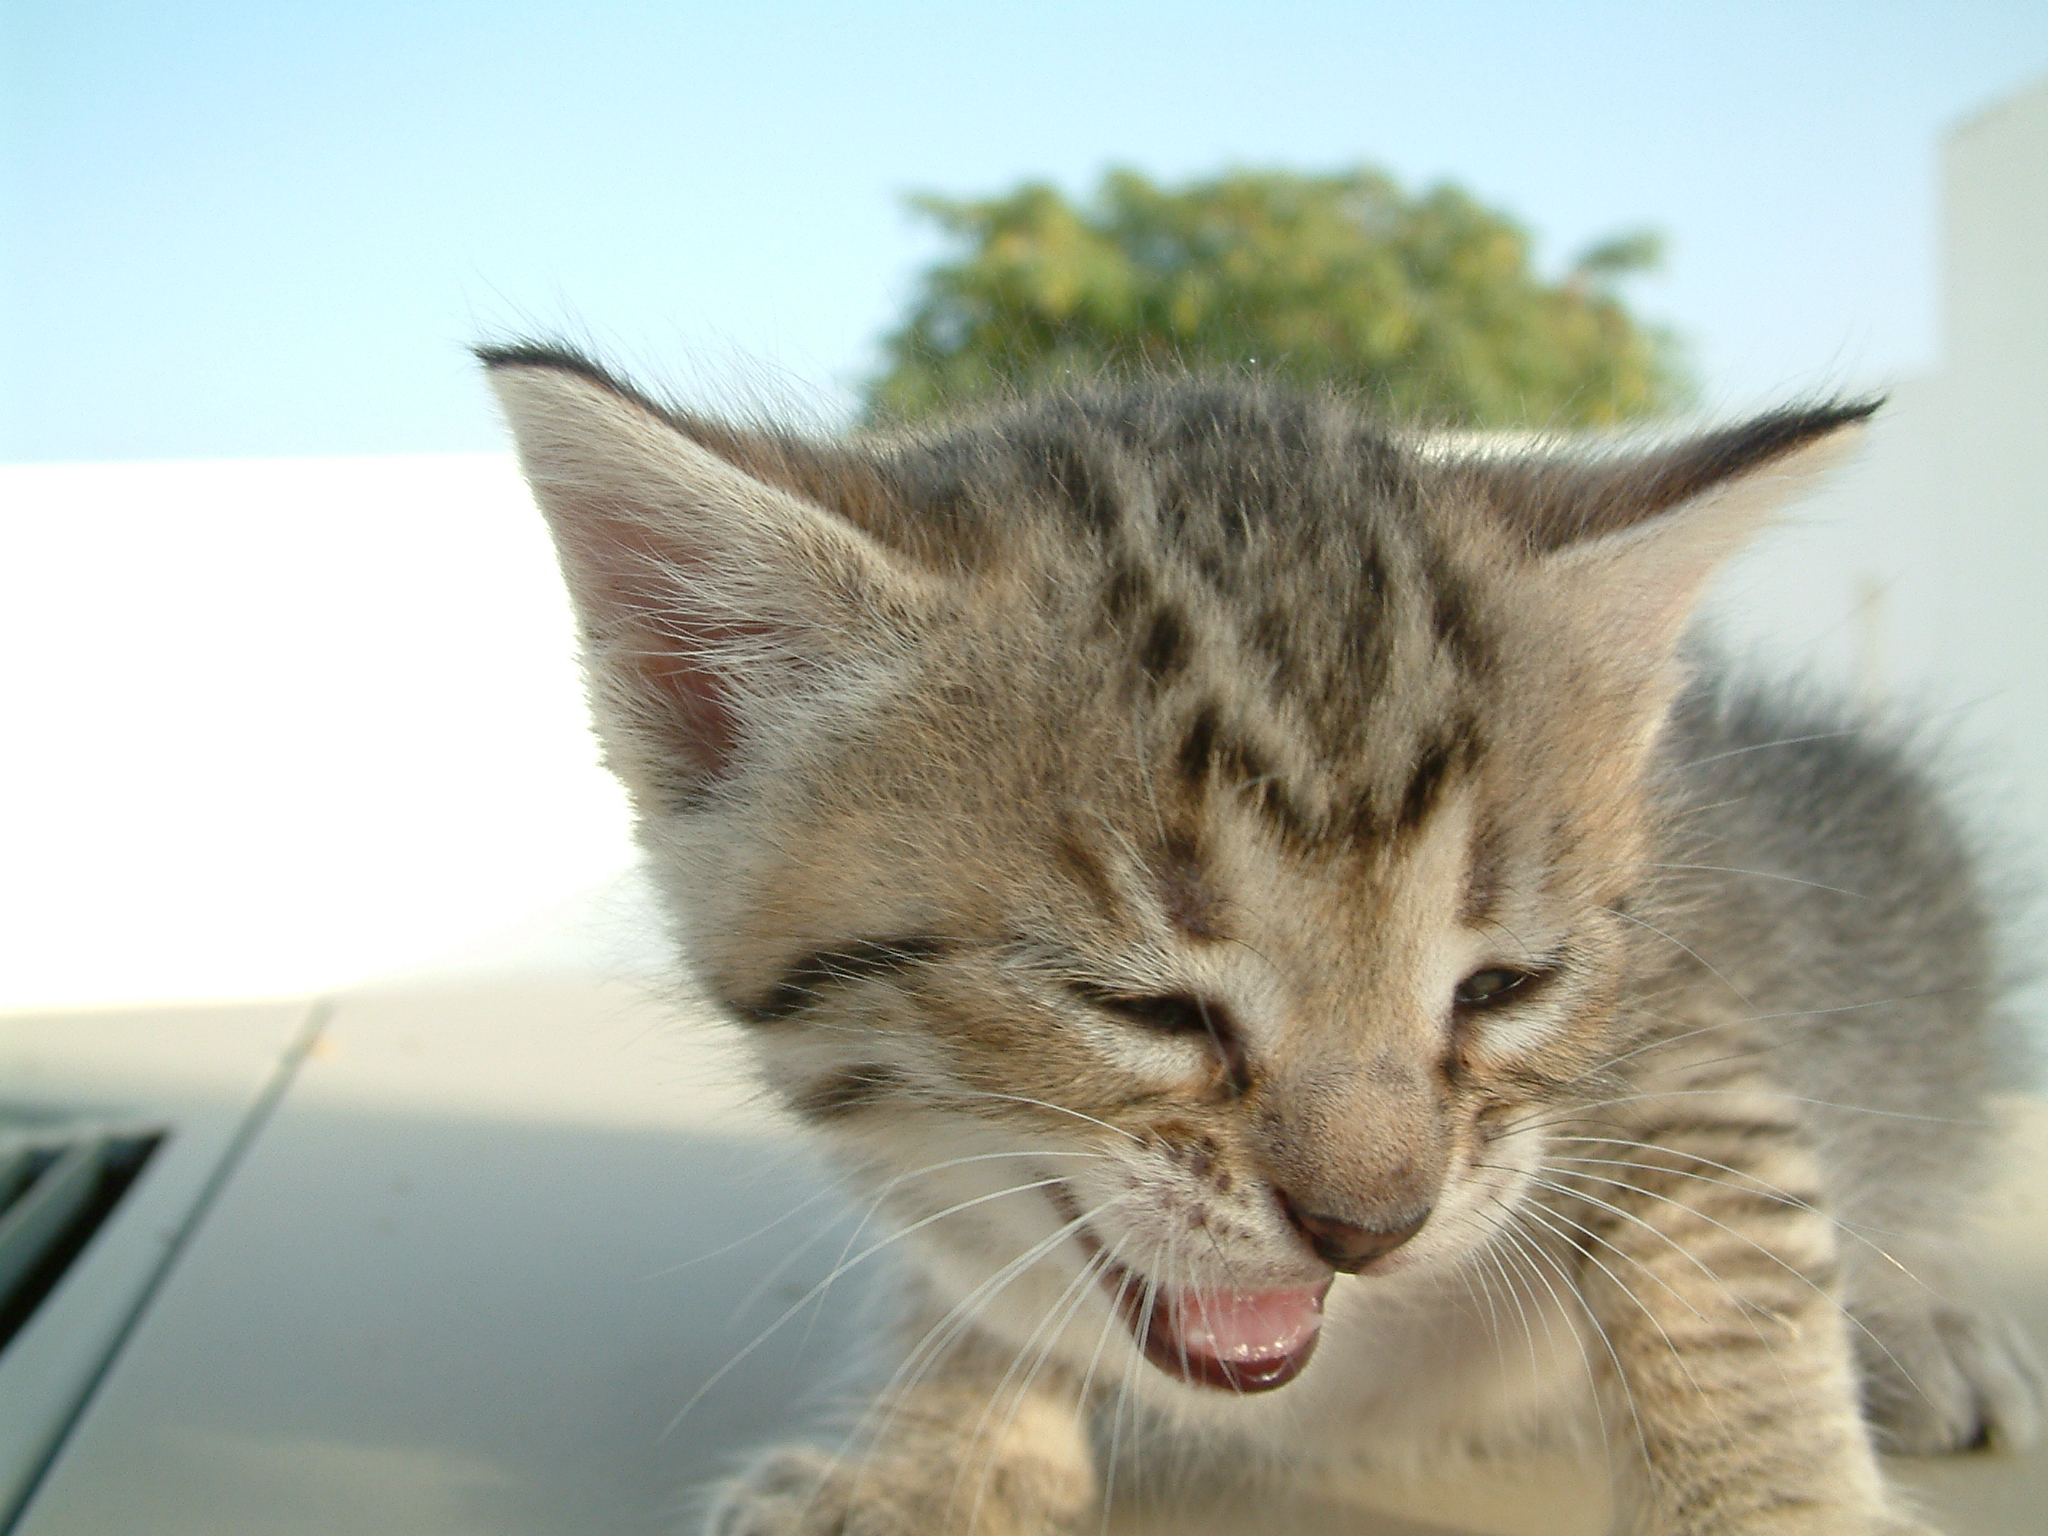 [error loading picture of adorable kitten. that's a shame because it would have changed your life]